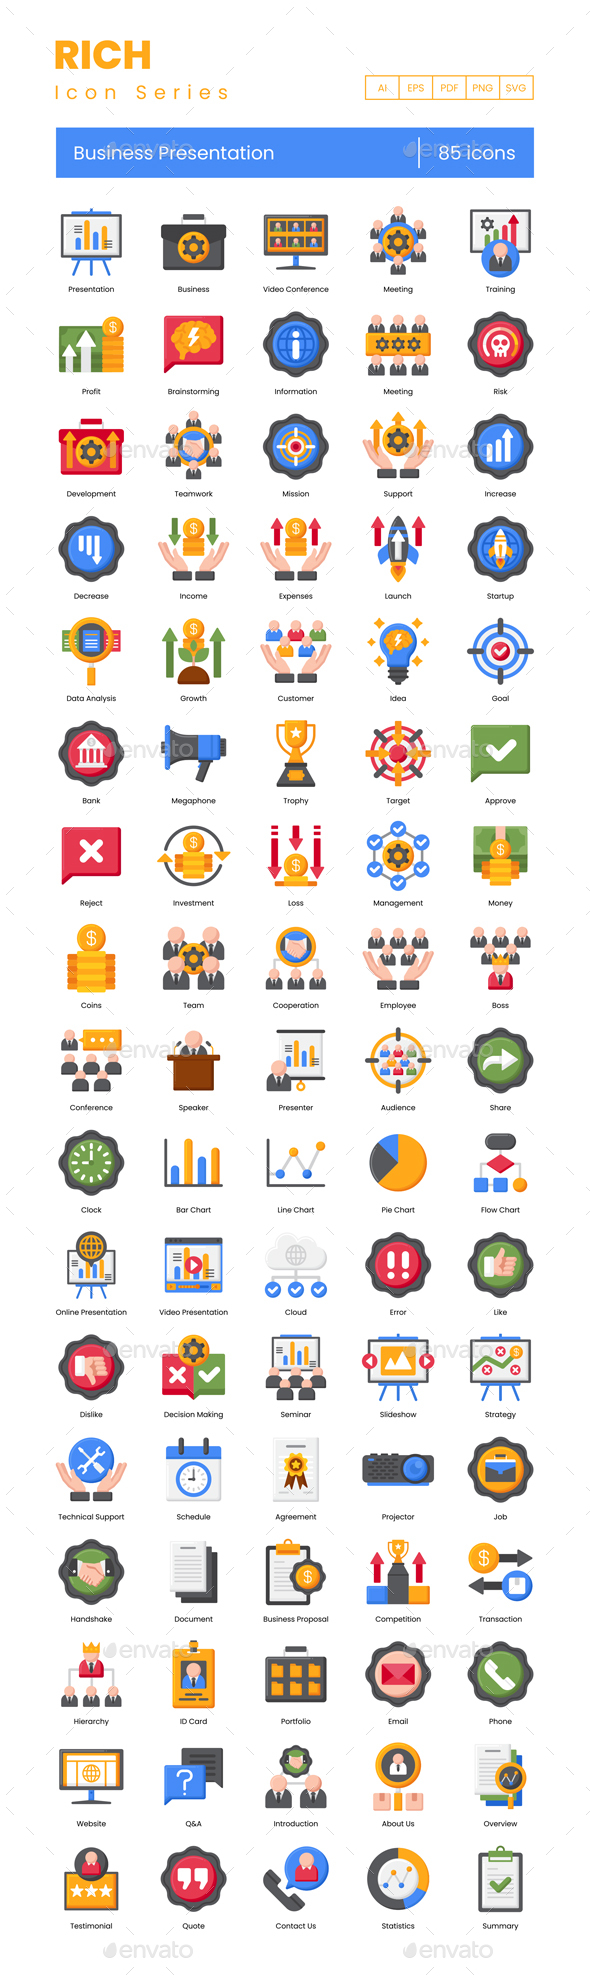 [DOWNLOAD]85 Business Presentation Icons | Rich Series